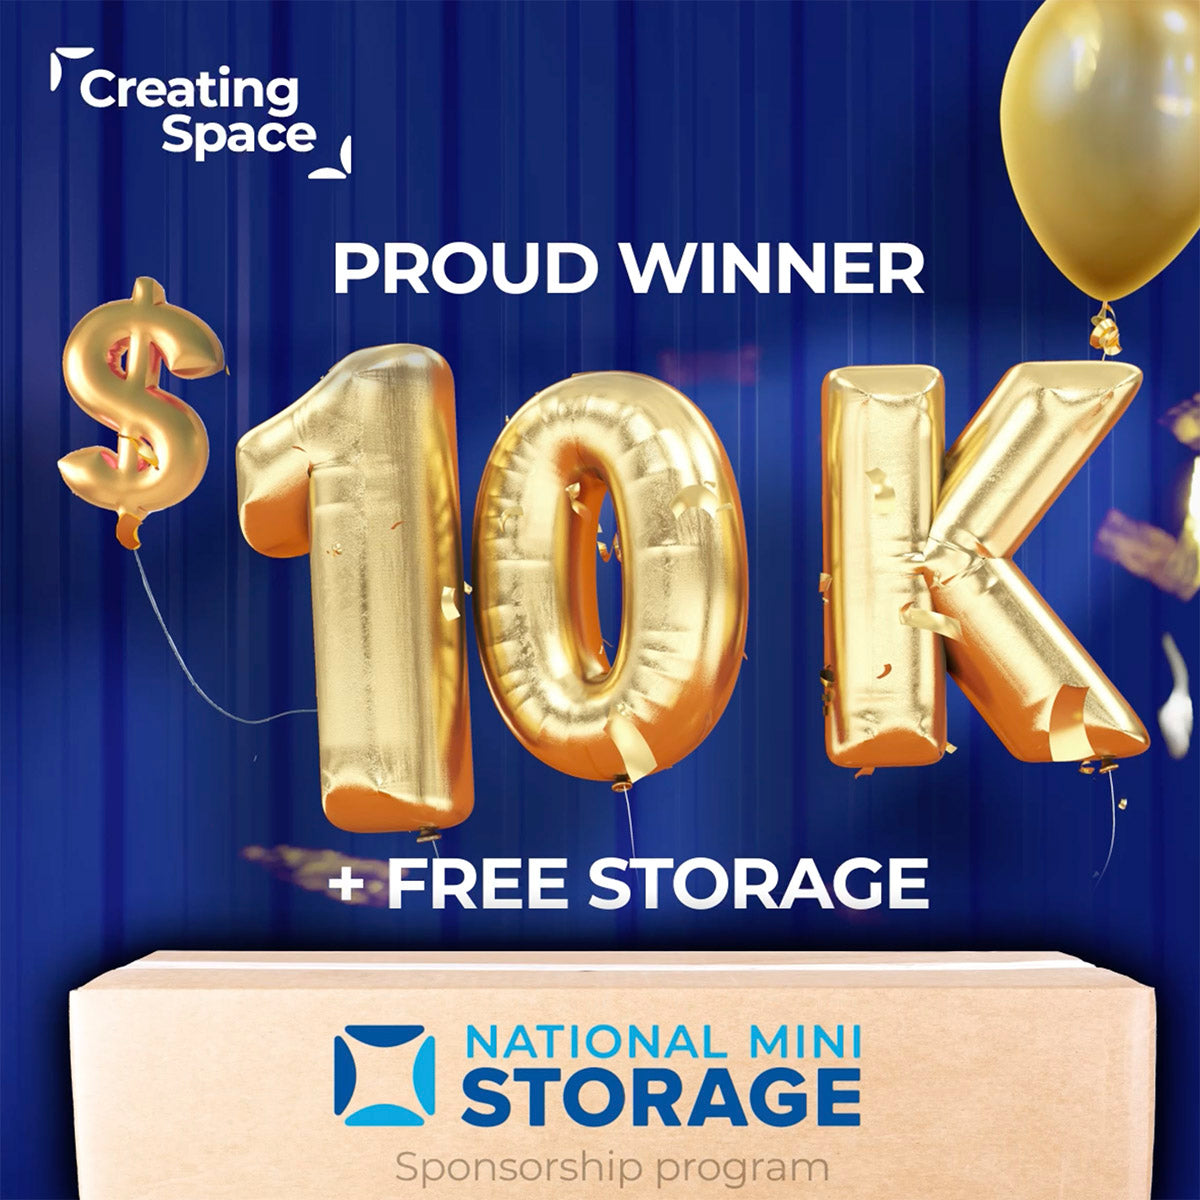 Celebrating Community Support: Voices of Hope Receives National Mini Storage's Creating Space Sponsorship